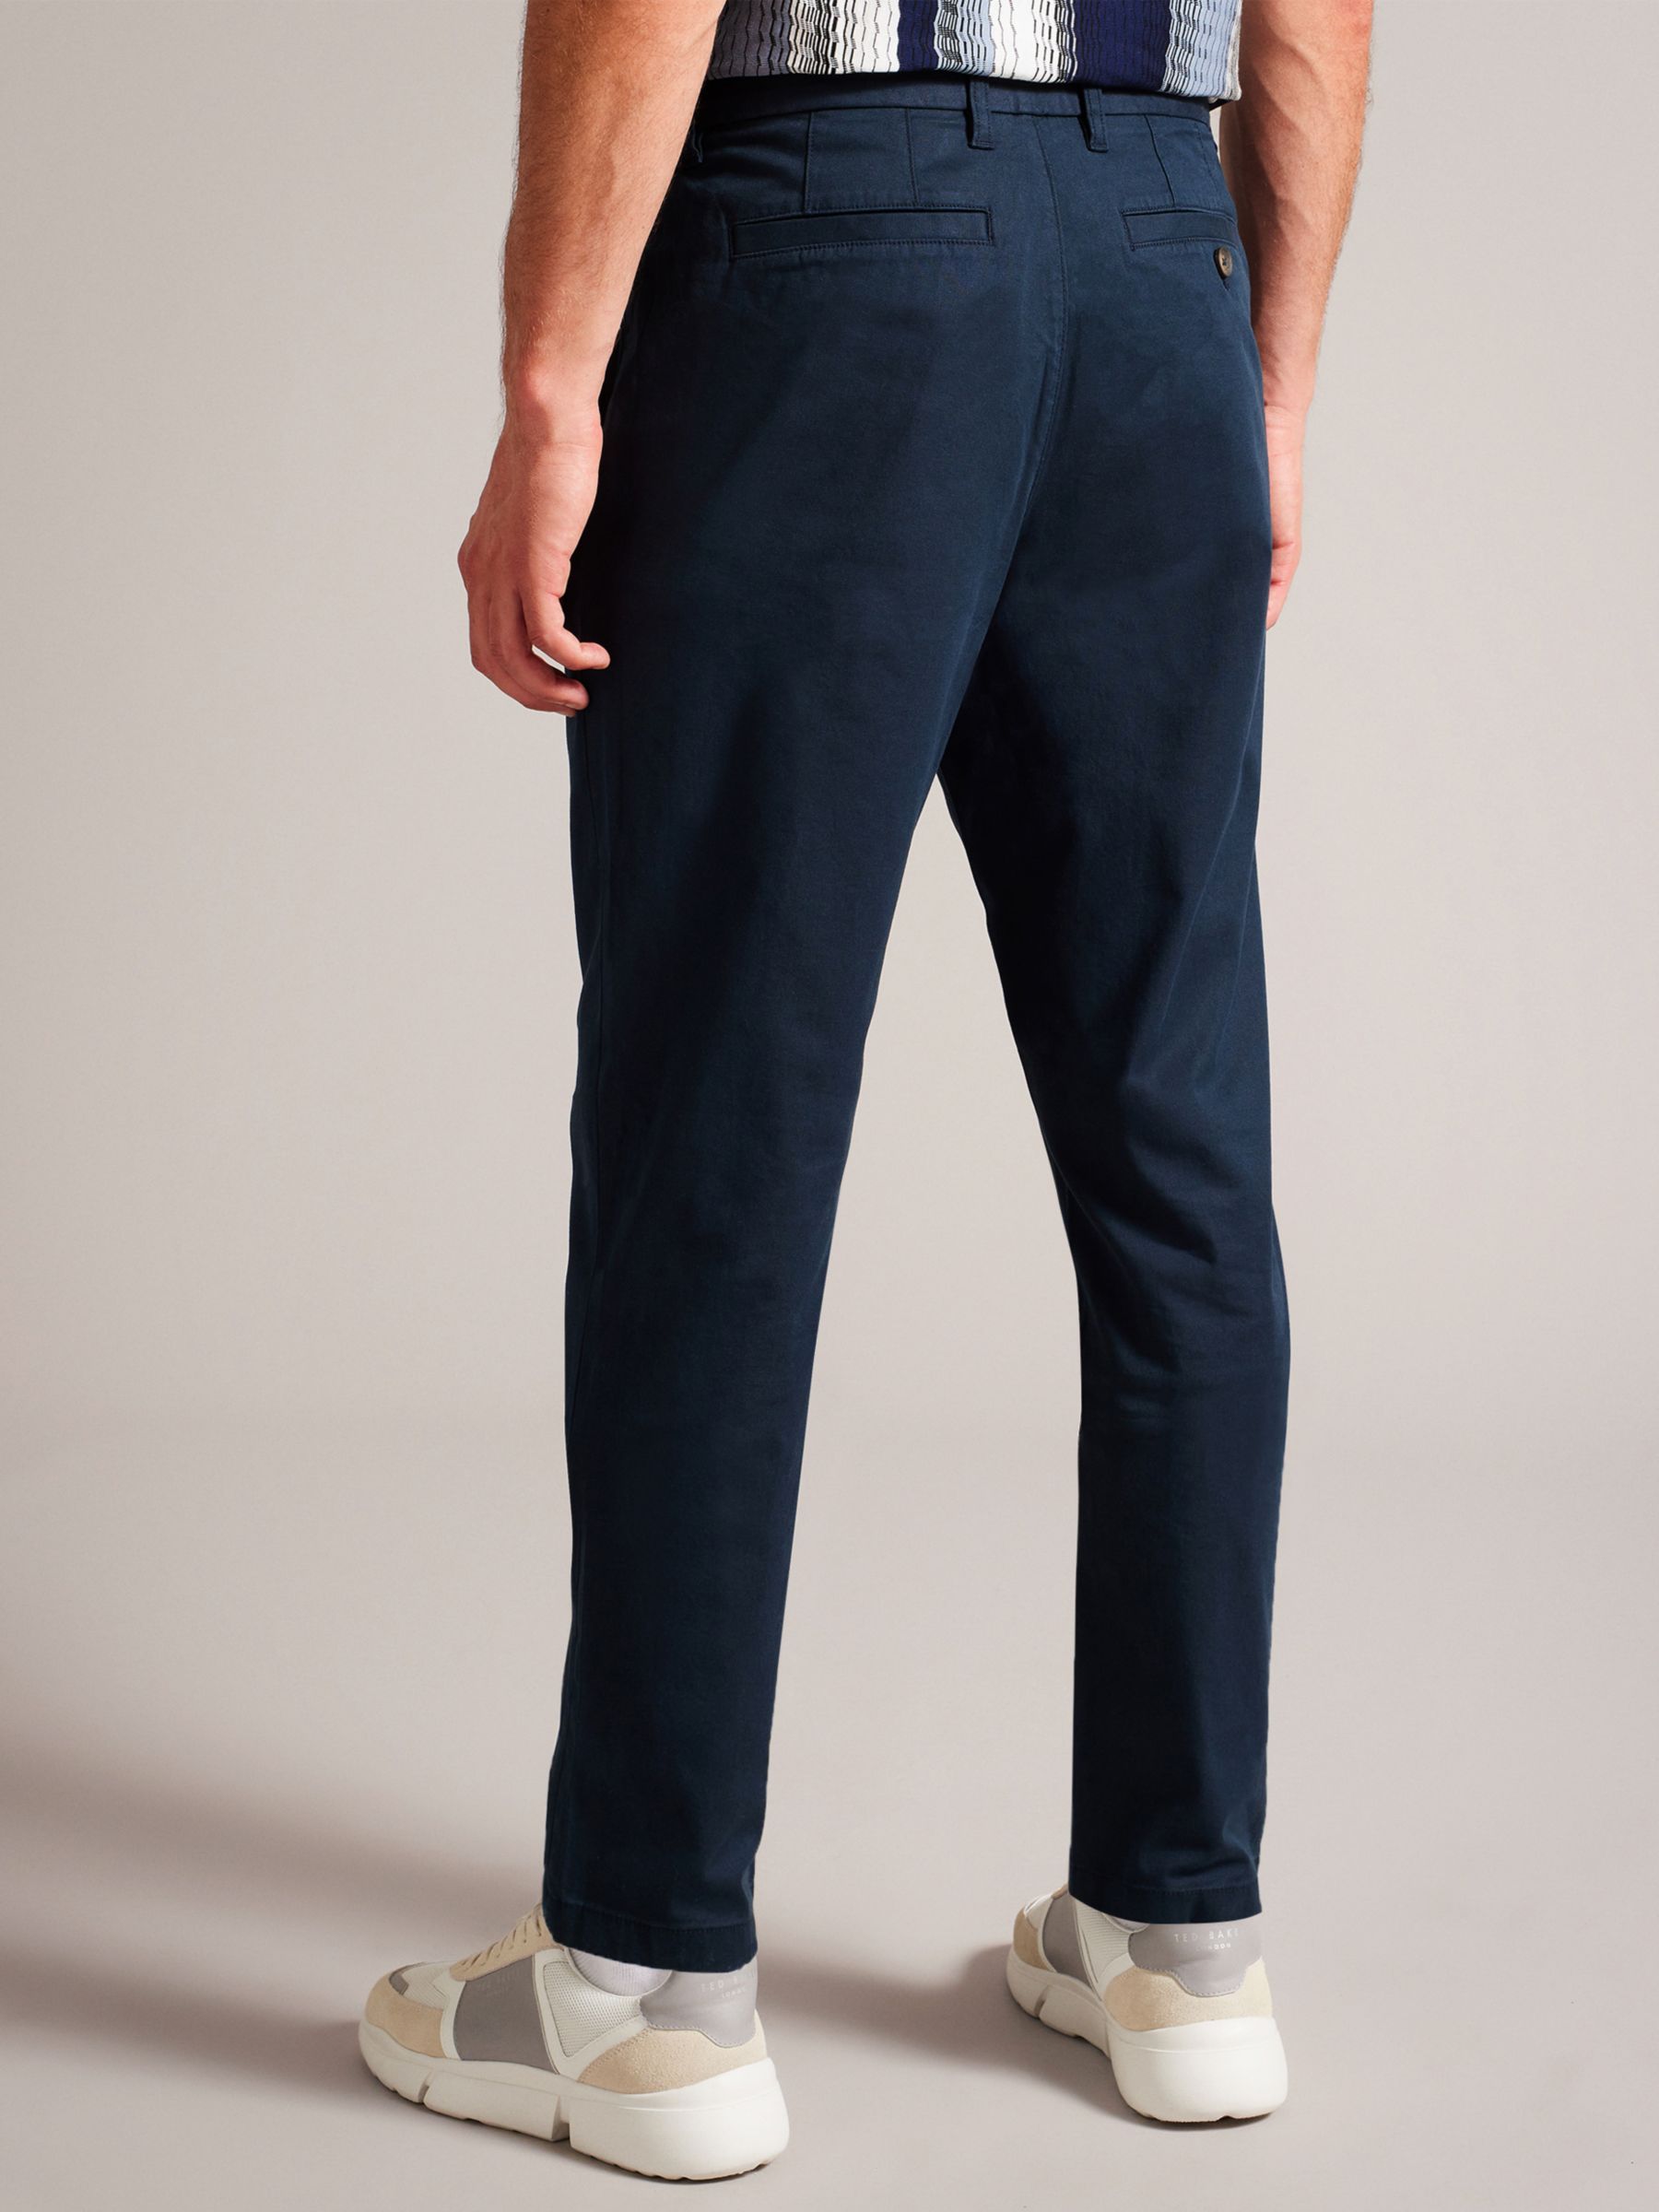 Ted Baker Haybrn Blue Navy Chino Trouser, Navy, 28R